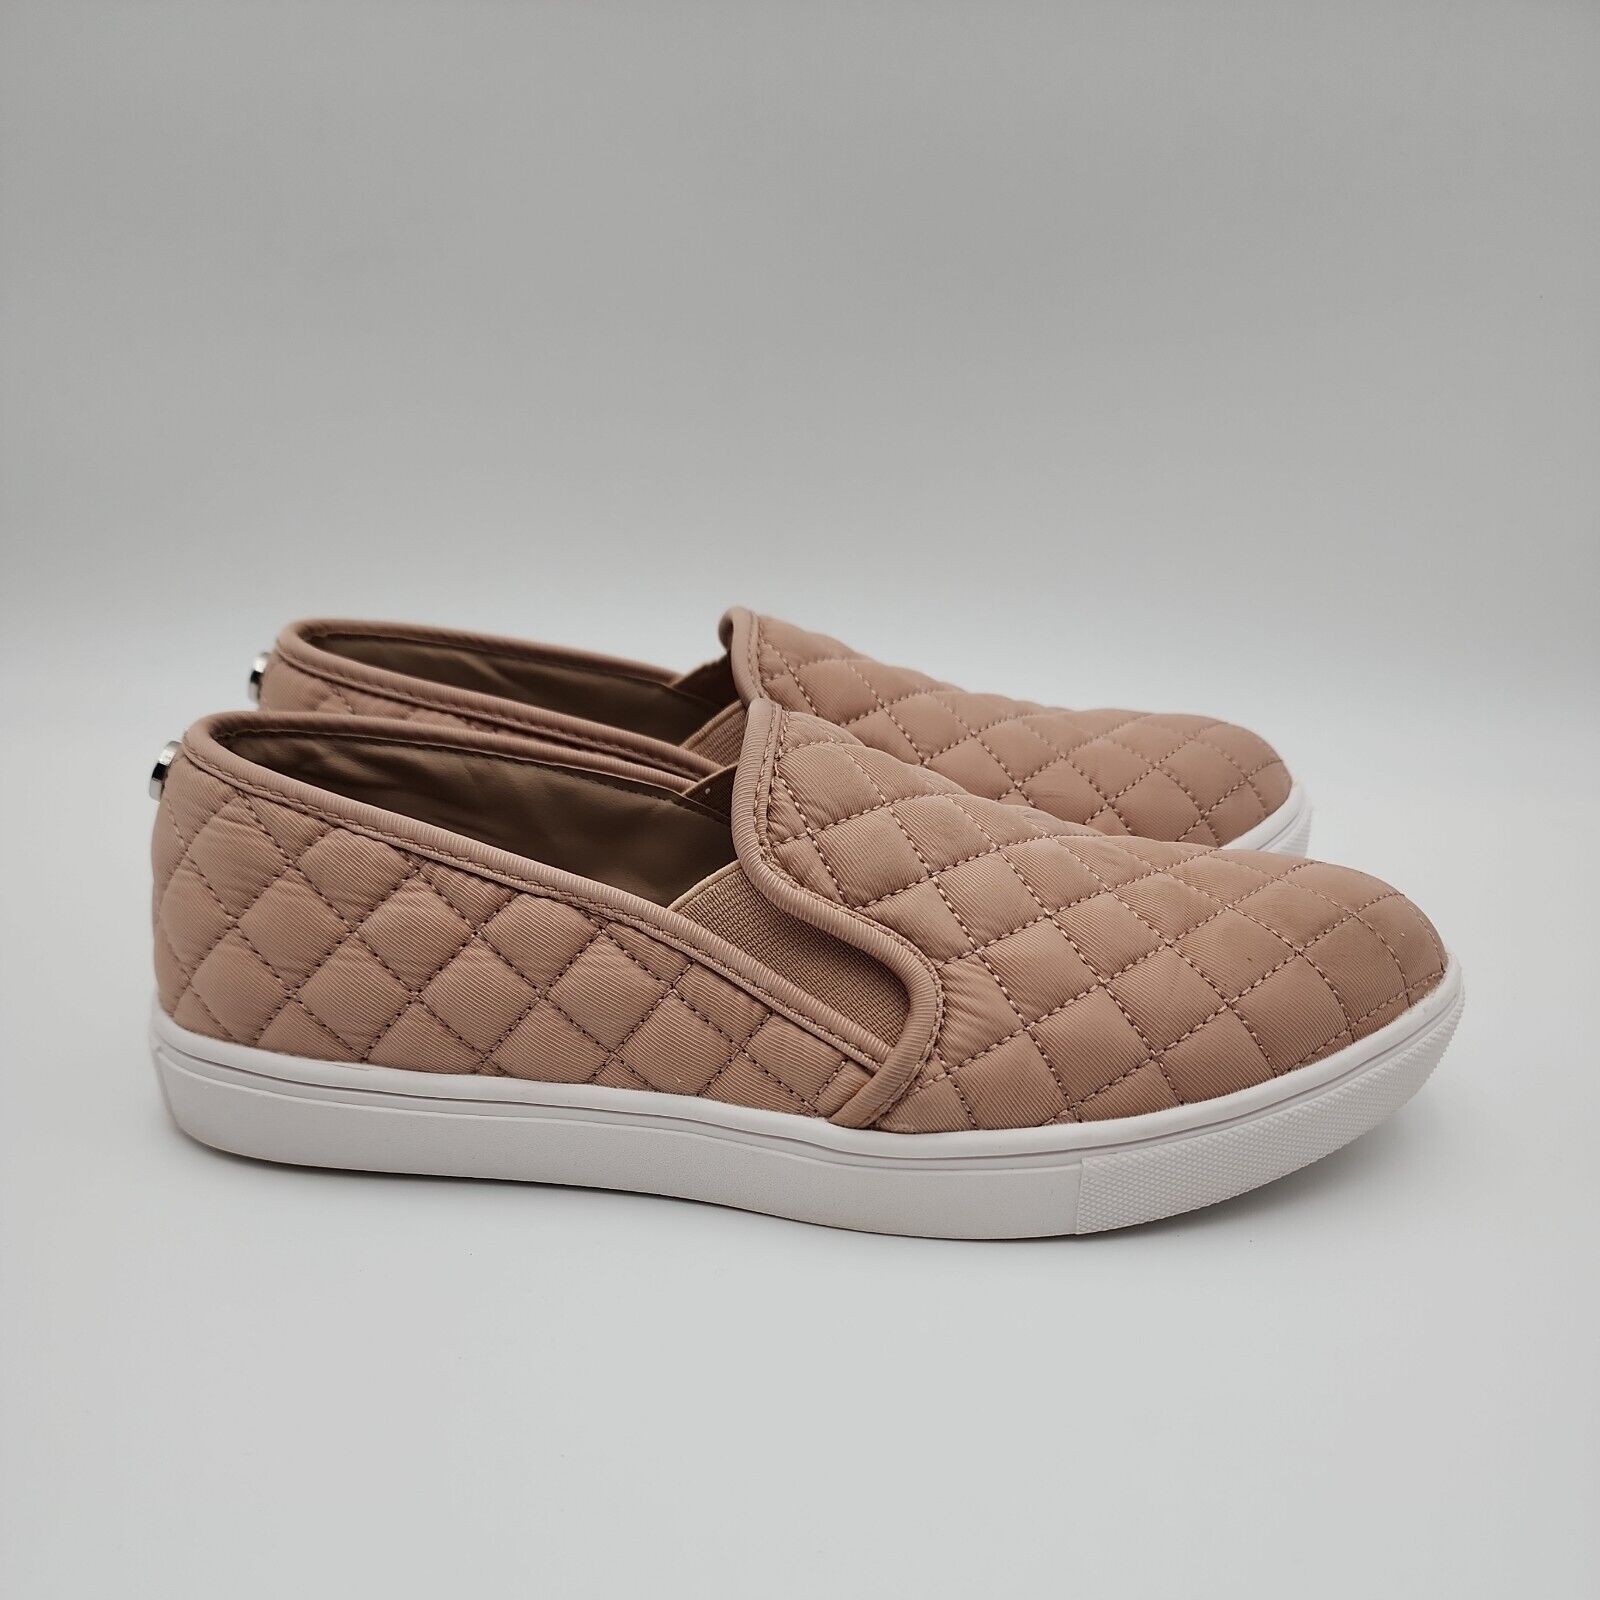 Steve Madden ECENTRCQ Quilted Slip On Casual Shoes Dusty Pink Size   Women's | eBay